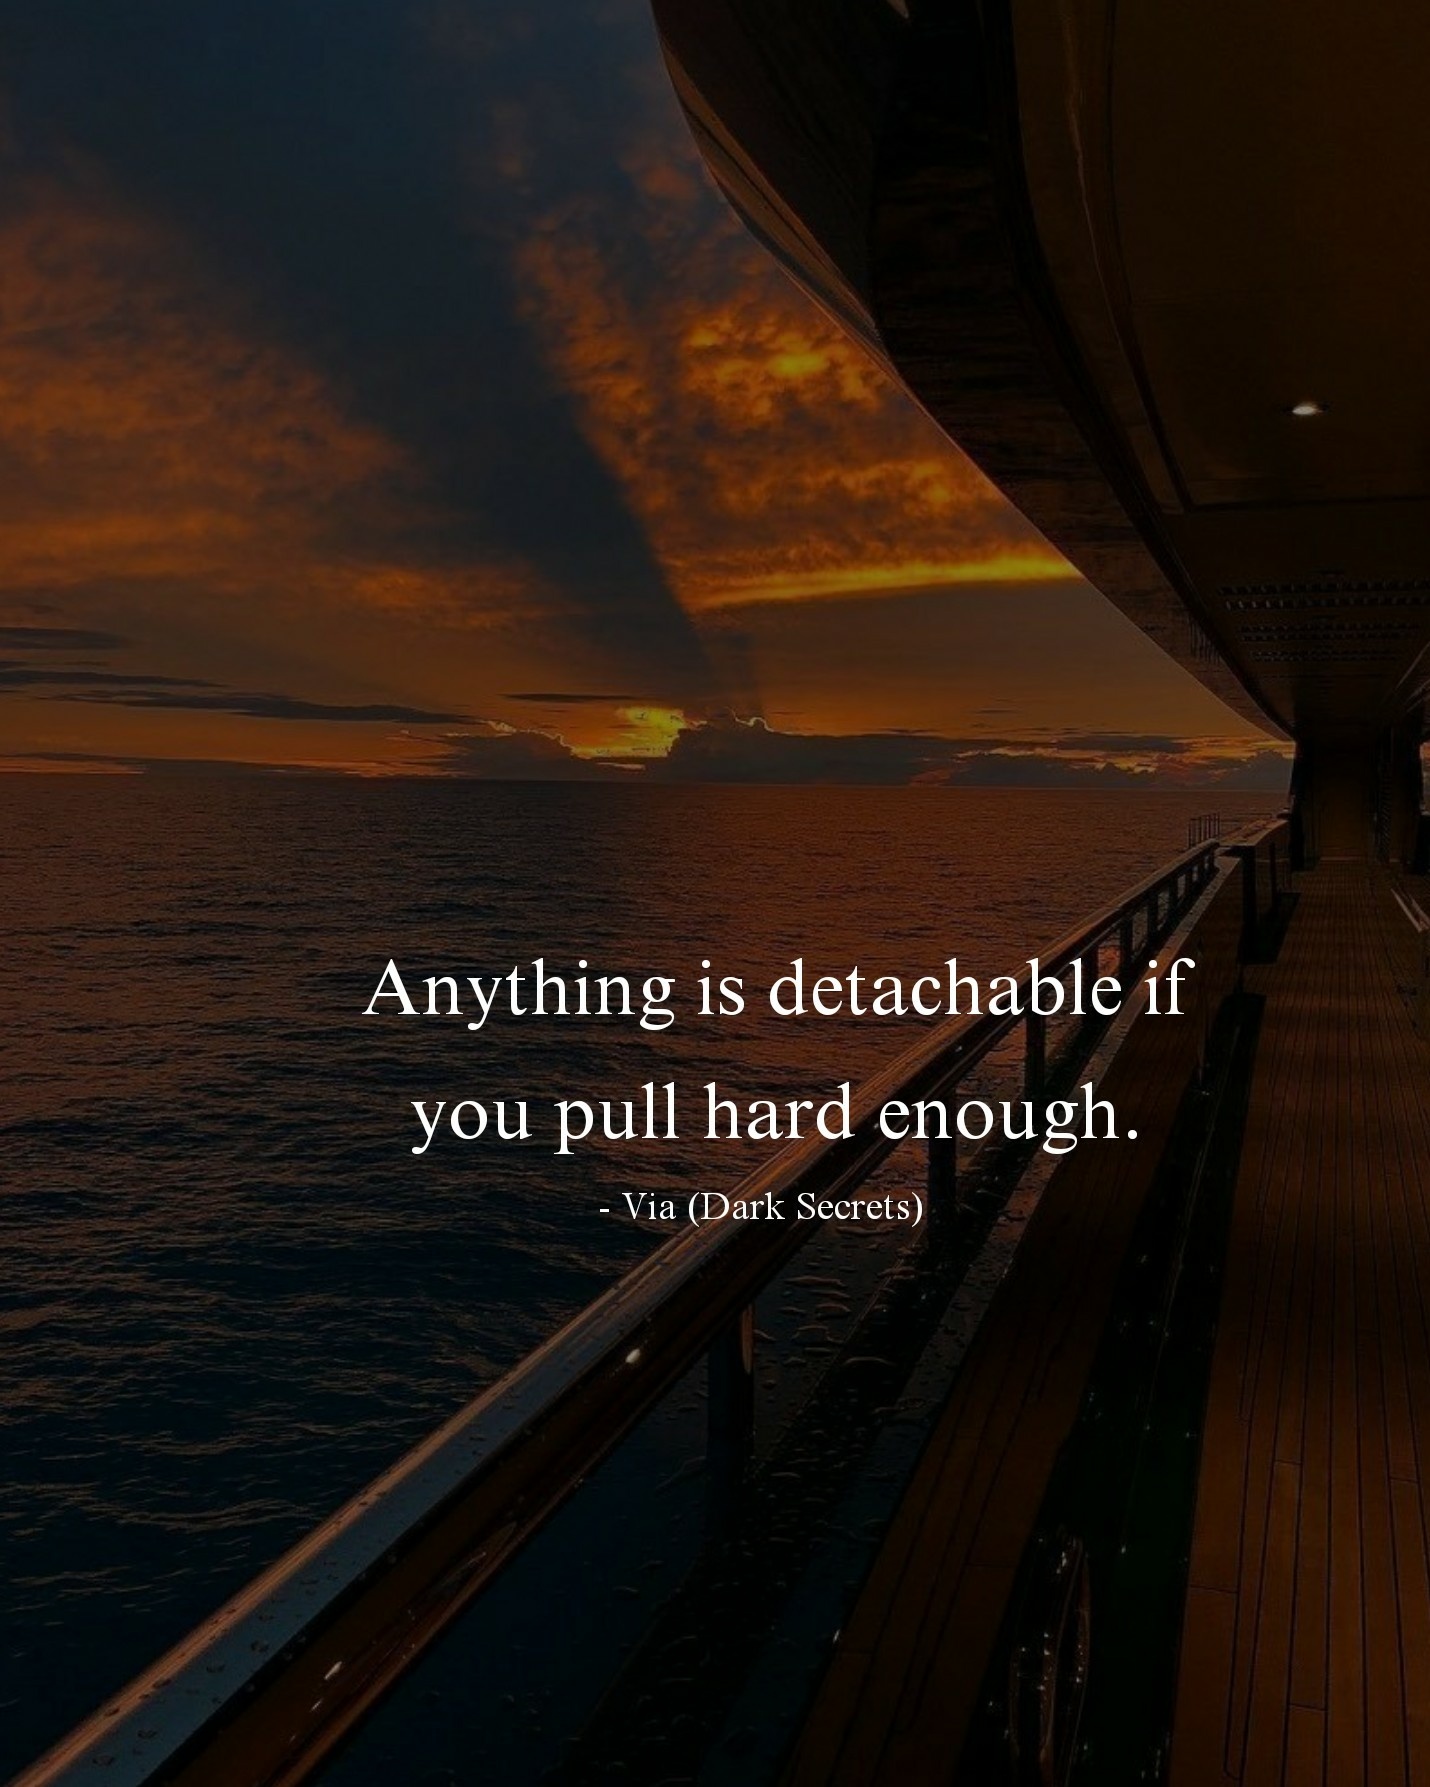 Anything is detachable if you pull hard enough.